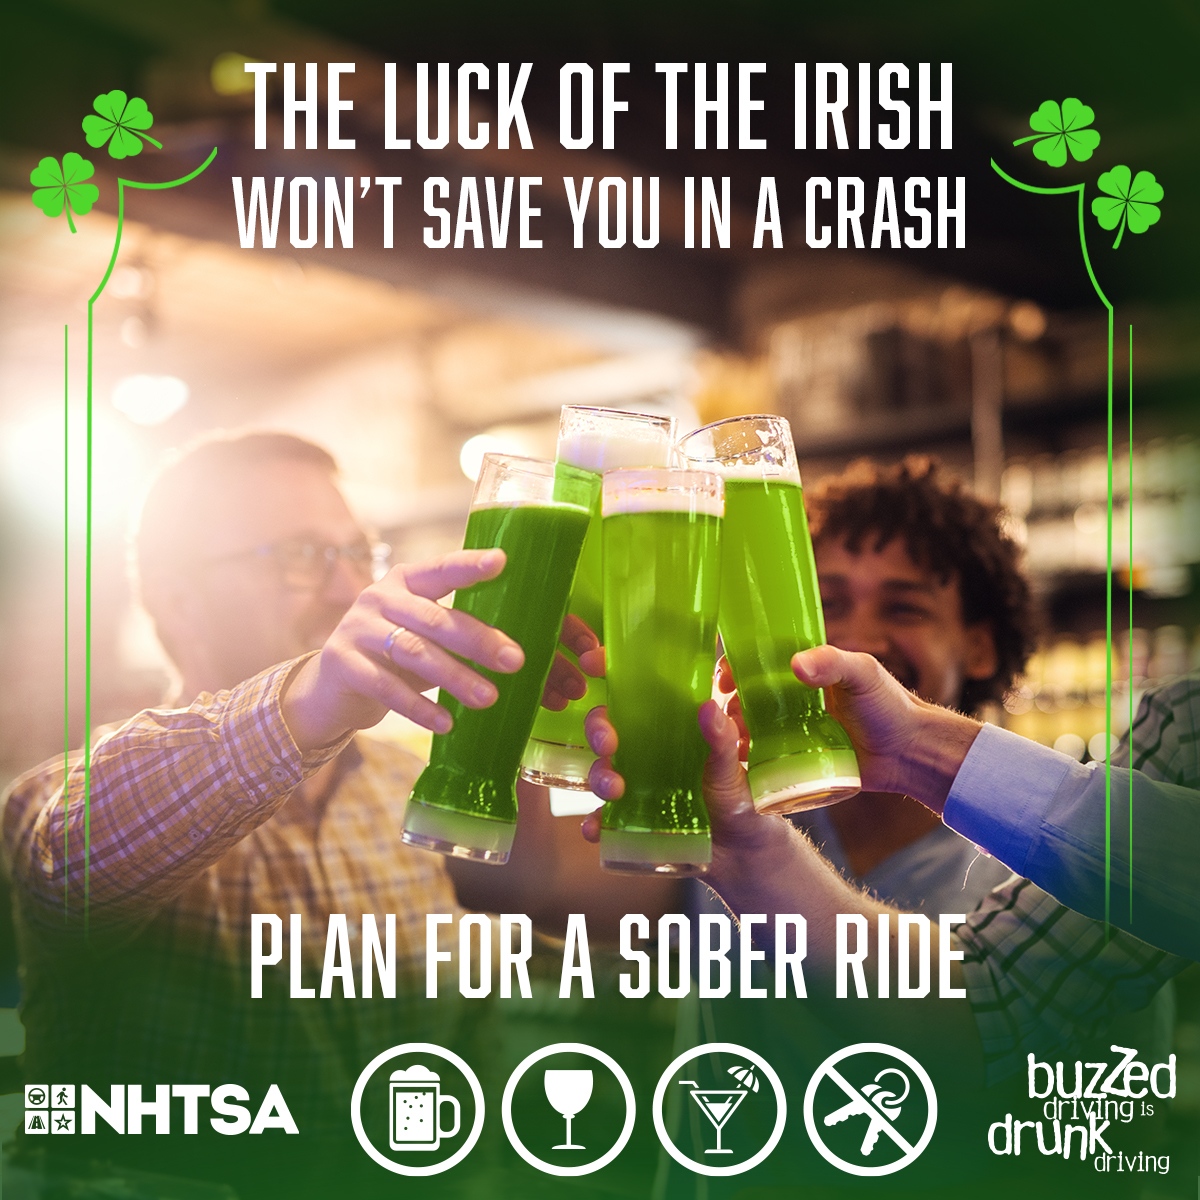 Don’t rely on the “Luck o’ the Irish” 🍀 to get home safely! If you’ve been drinking, call a sober friend, rideshare or taxi to get home safely. #BuzzedDriving is drunk driving.